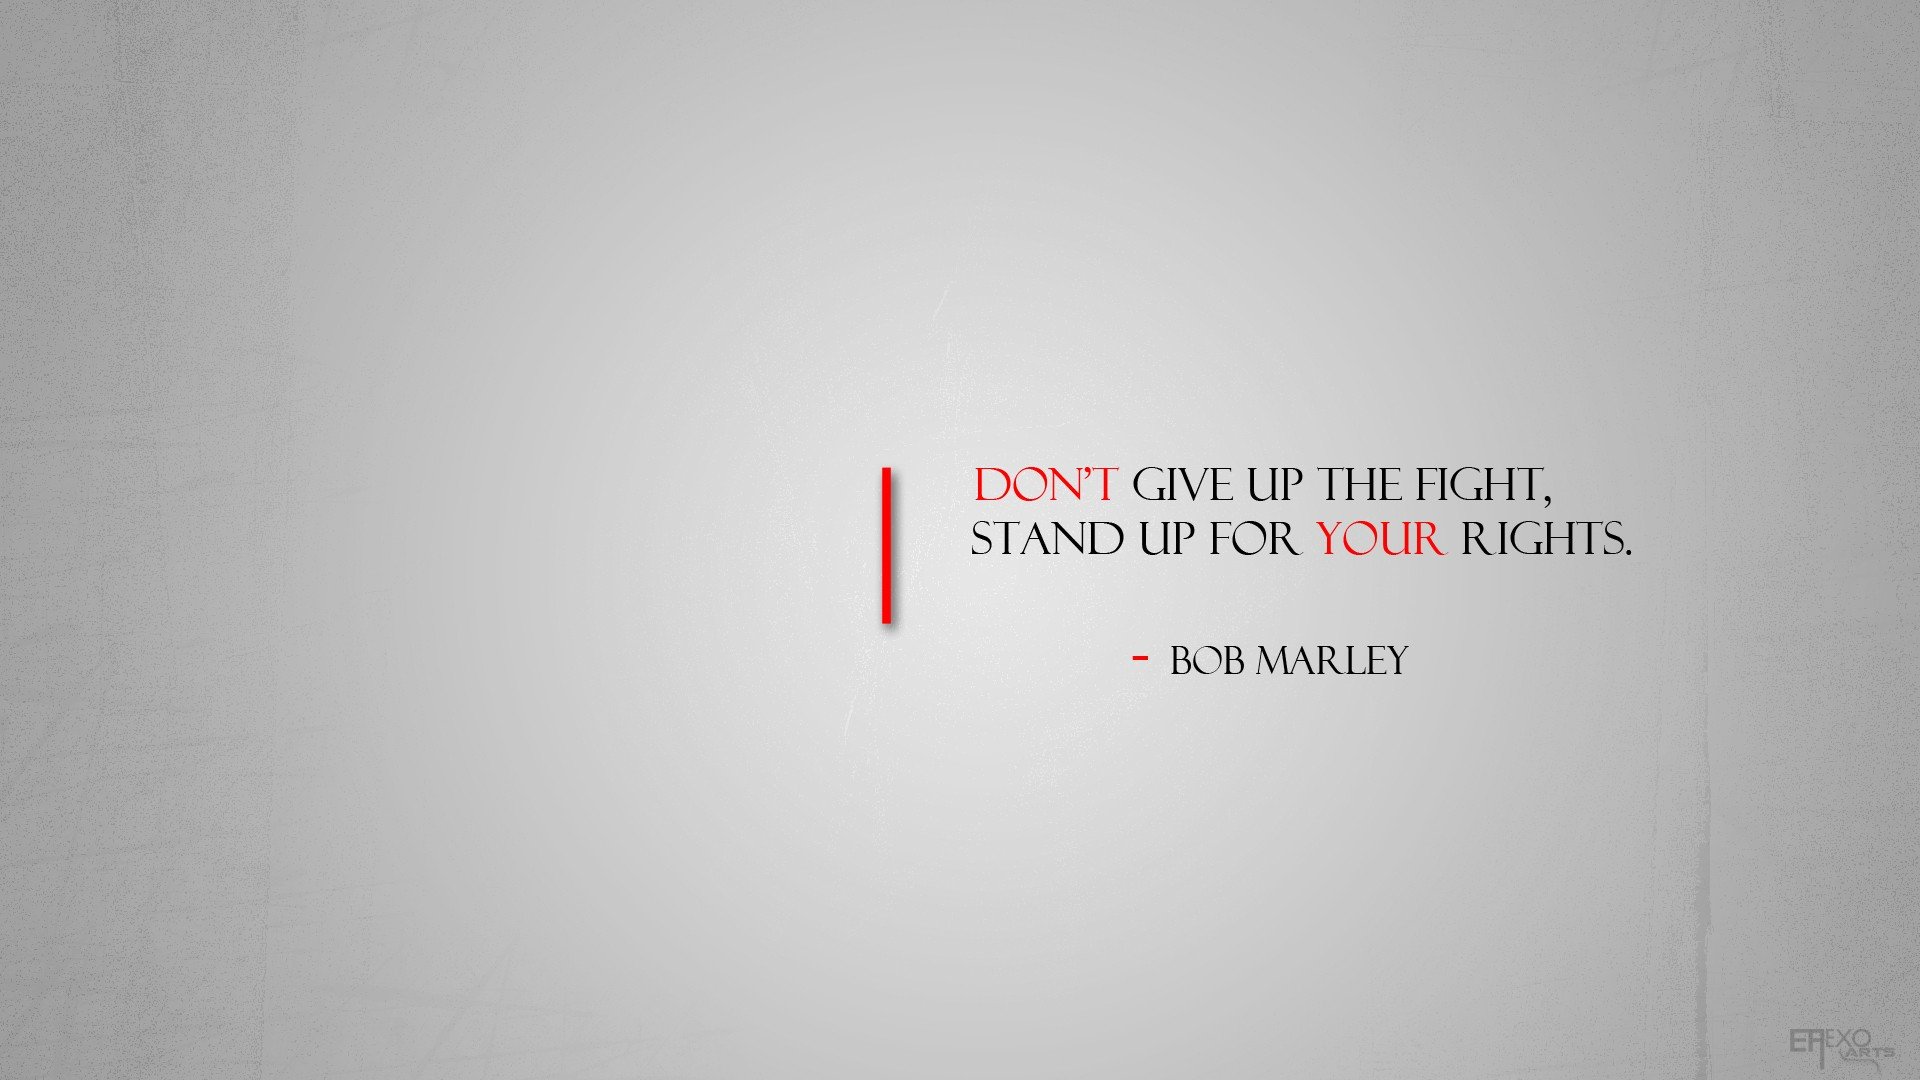 HD Quote Wallpaper Download For 1920x1080